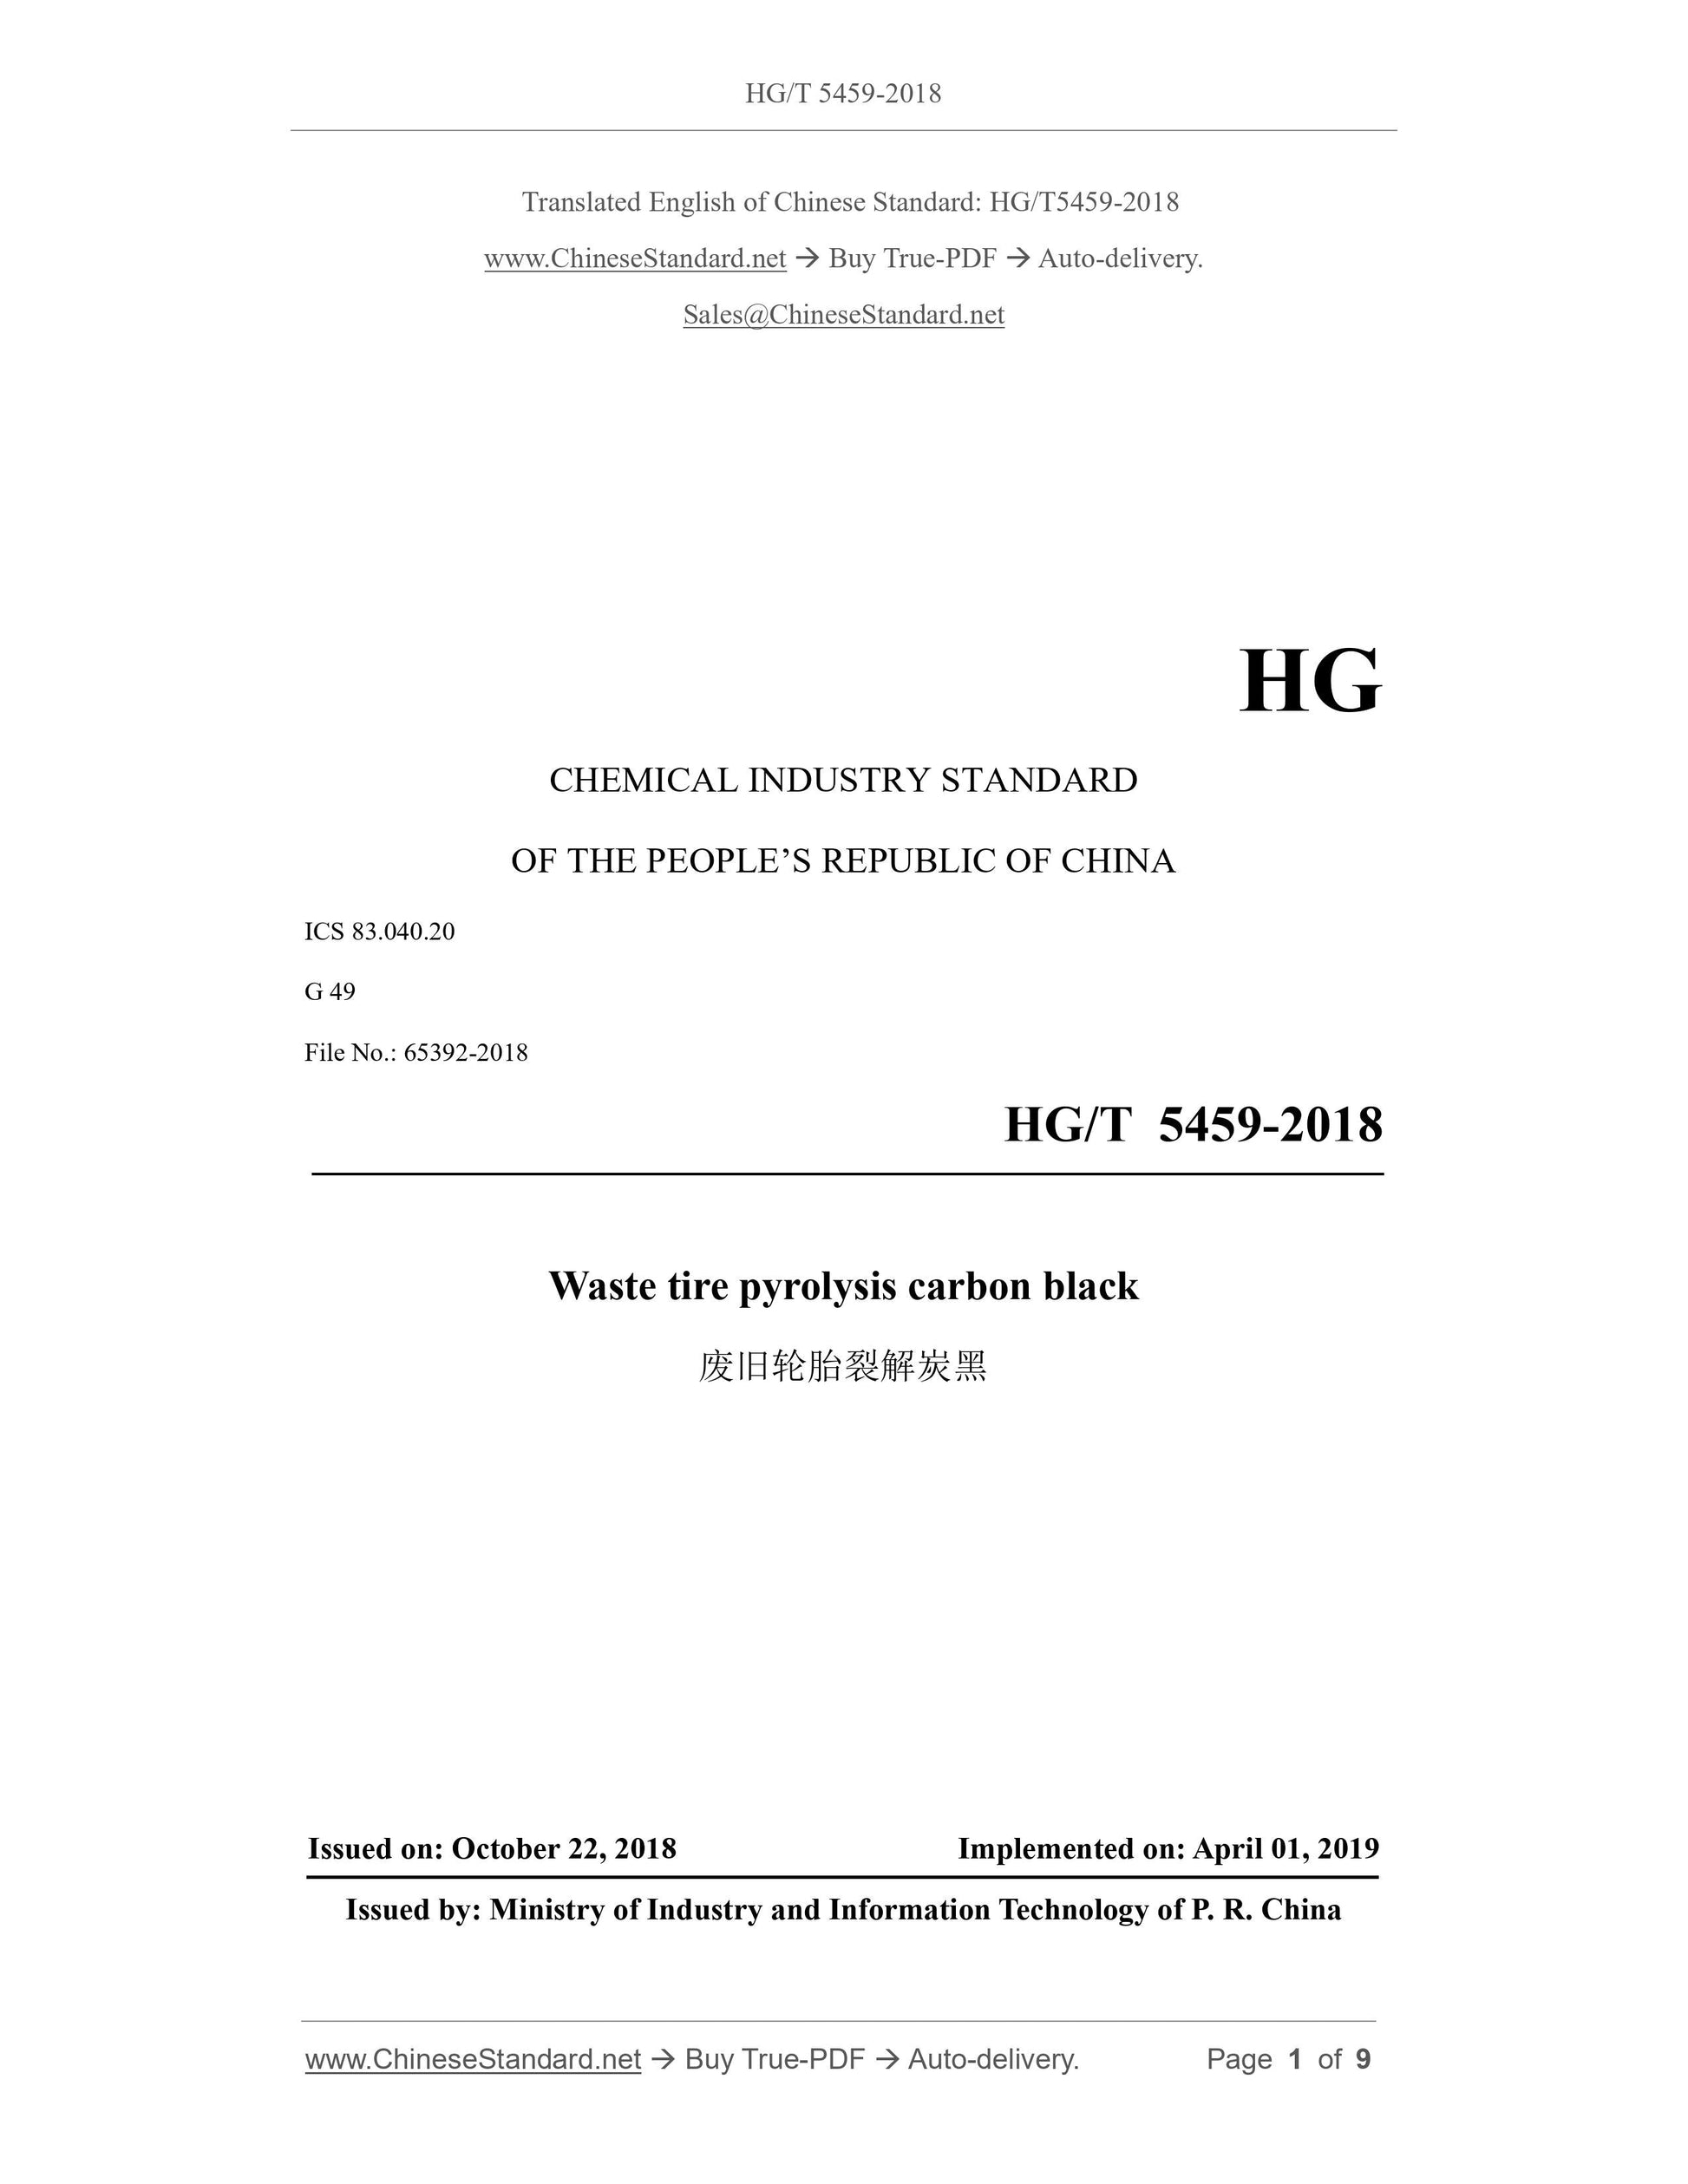 HG/T 5459-2018 Page 1